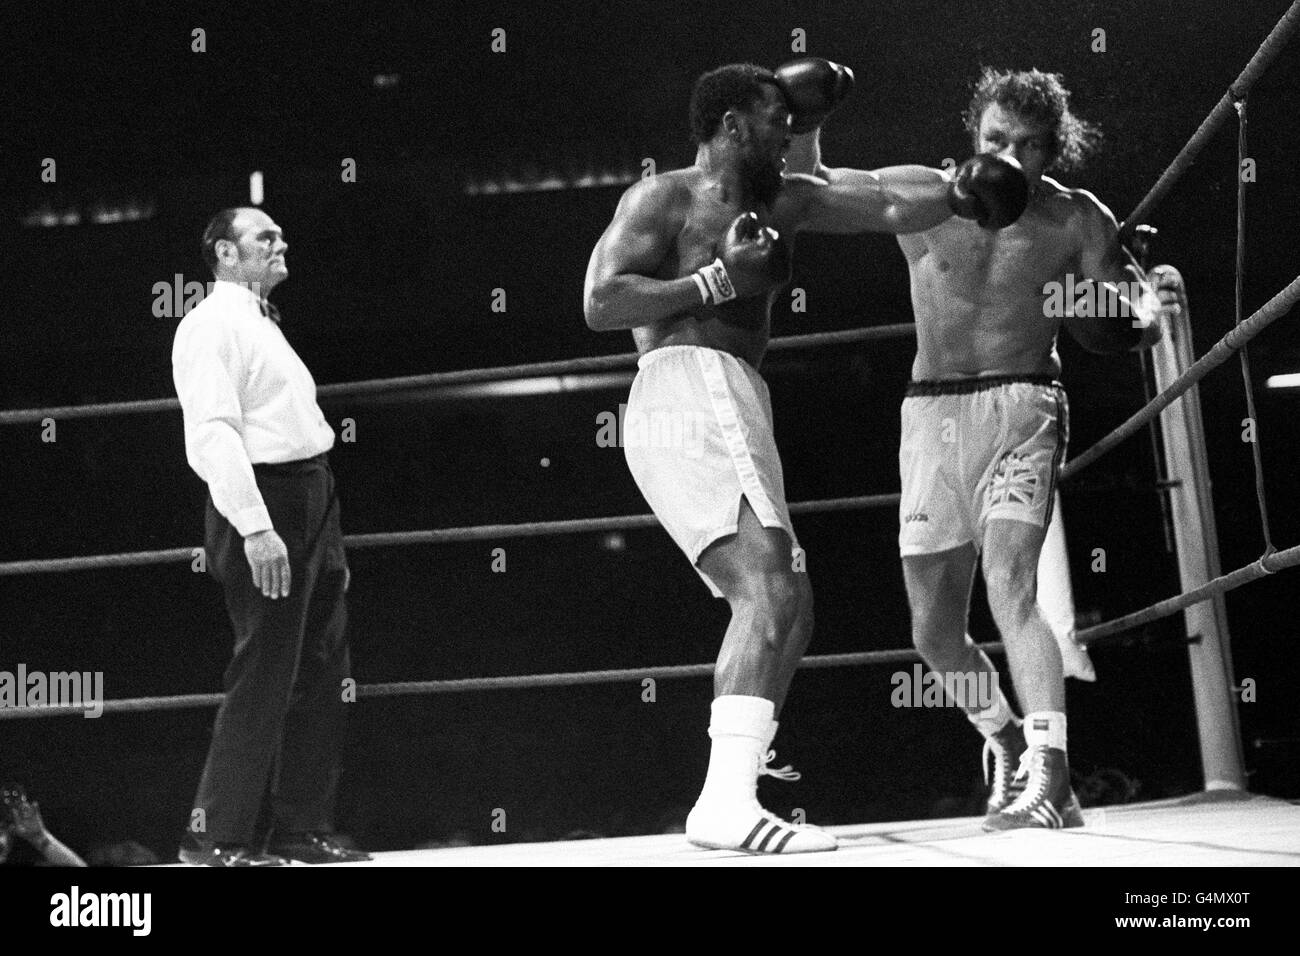 Ex-heavyweight champion of the world, Joe Frazier, left, of the USA, in action against Britain's Joe Bugner. Watching is referee Harry Gibbs. Stock Photo